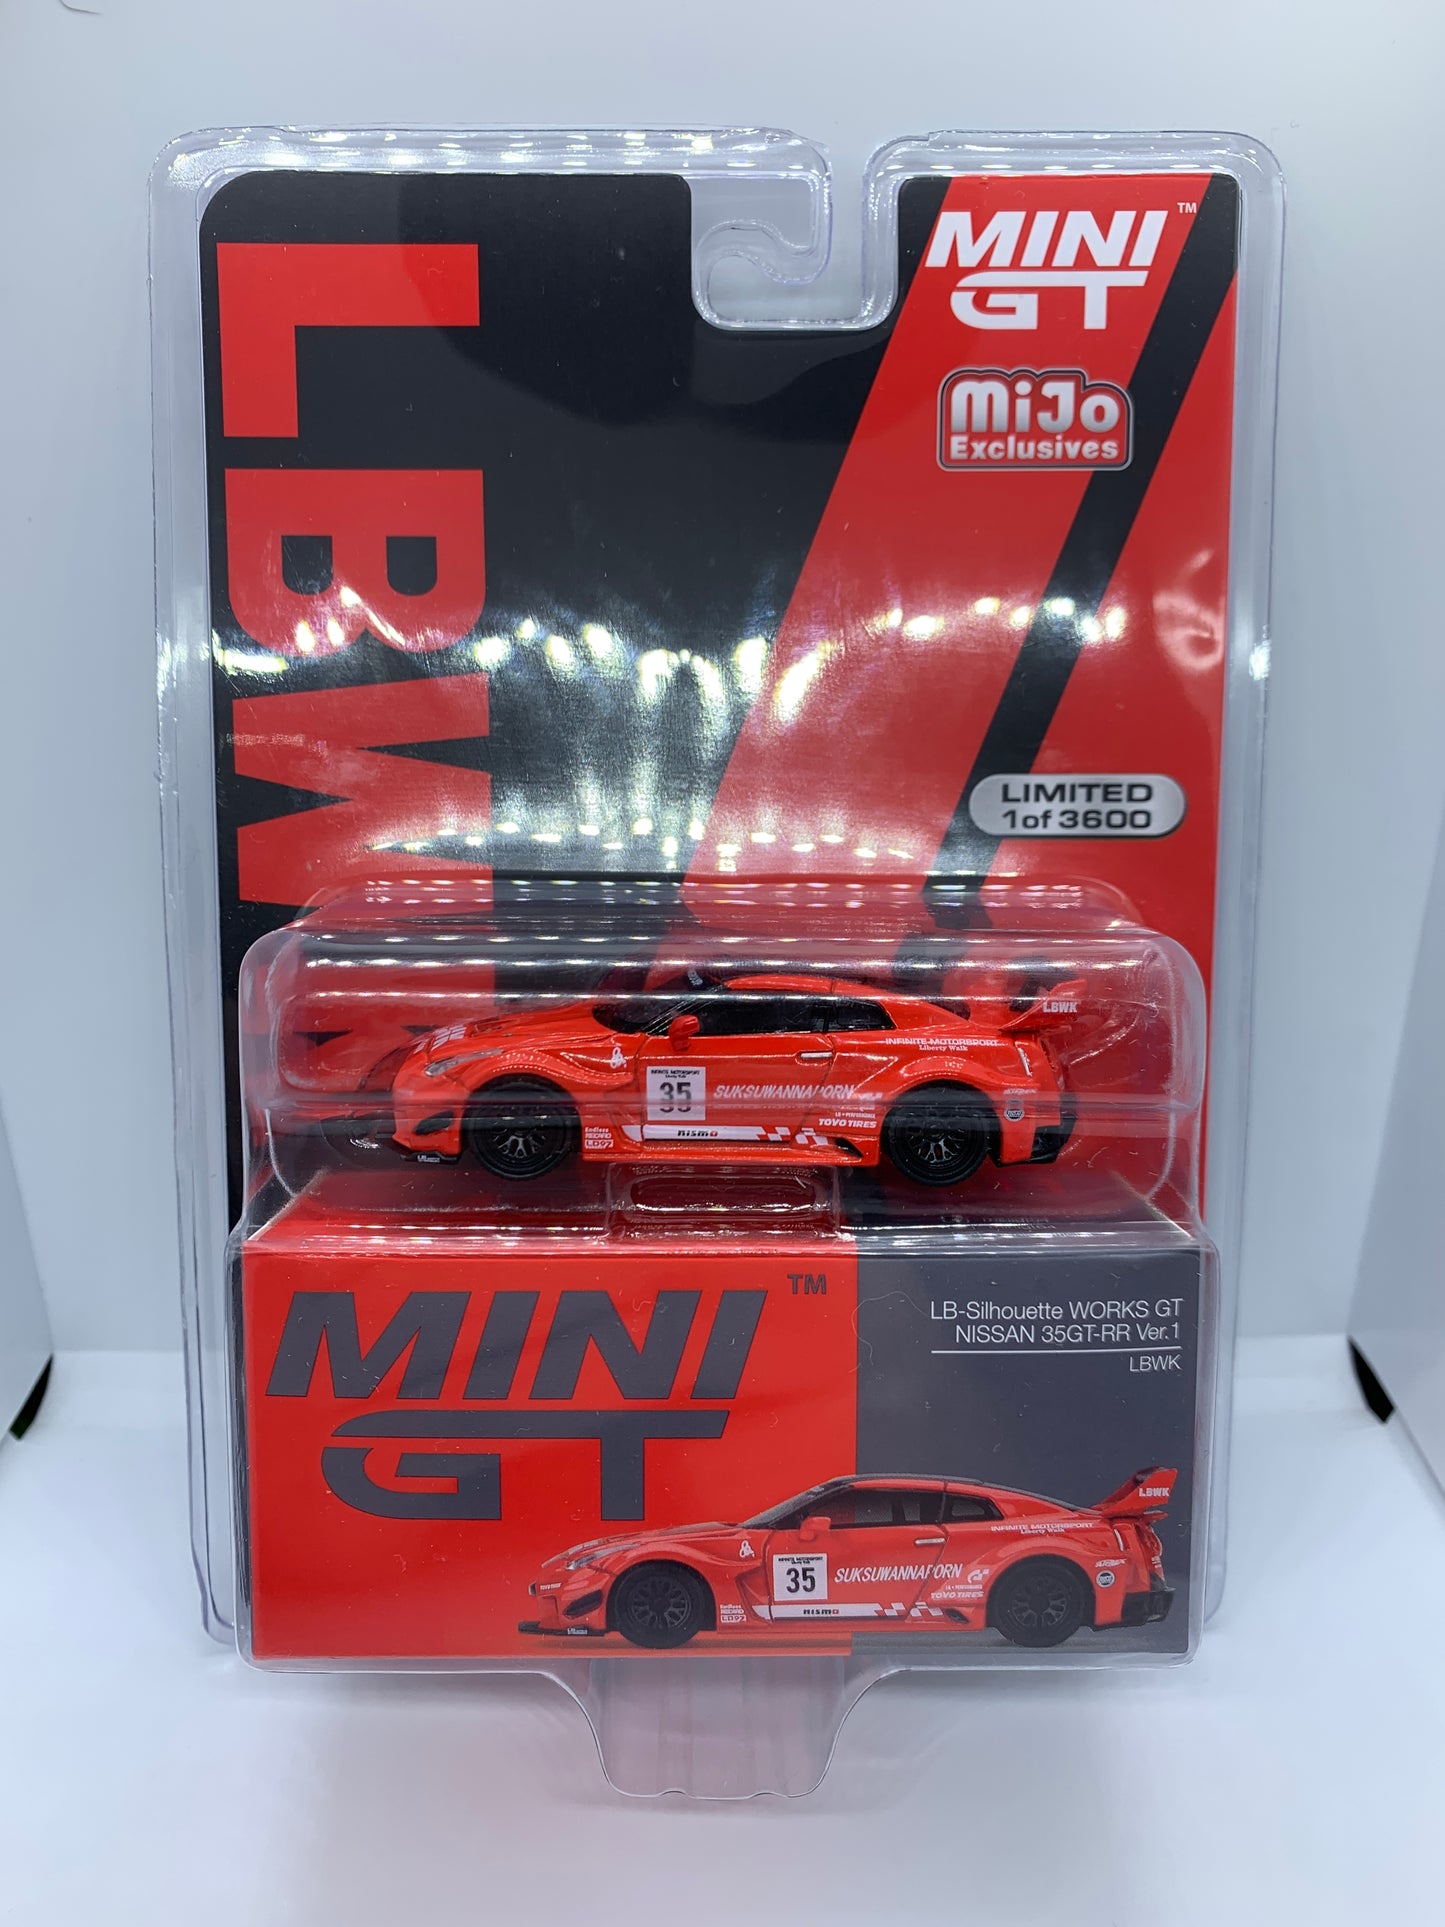 MINI GT - Nissan R35 GT-R LB-Silhouette Works GT 35GT-RR Ver.1 Red - Display Blister Packaging